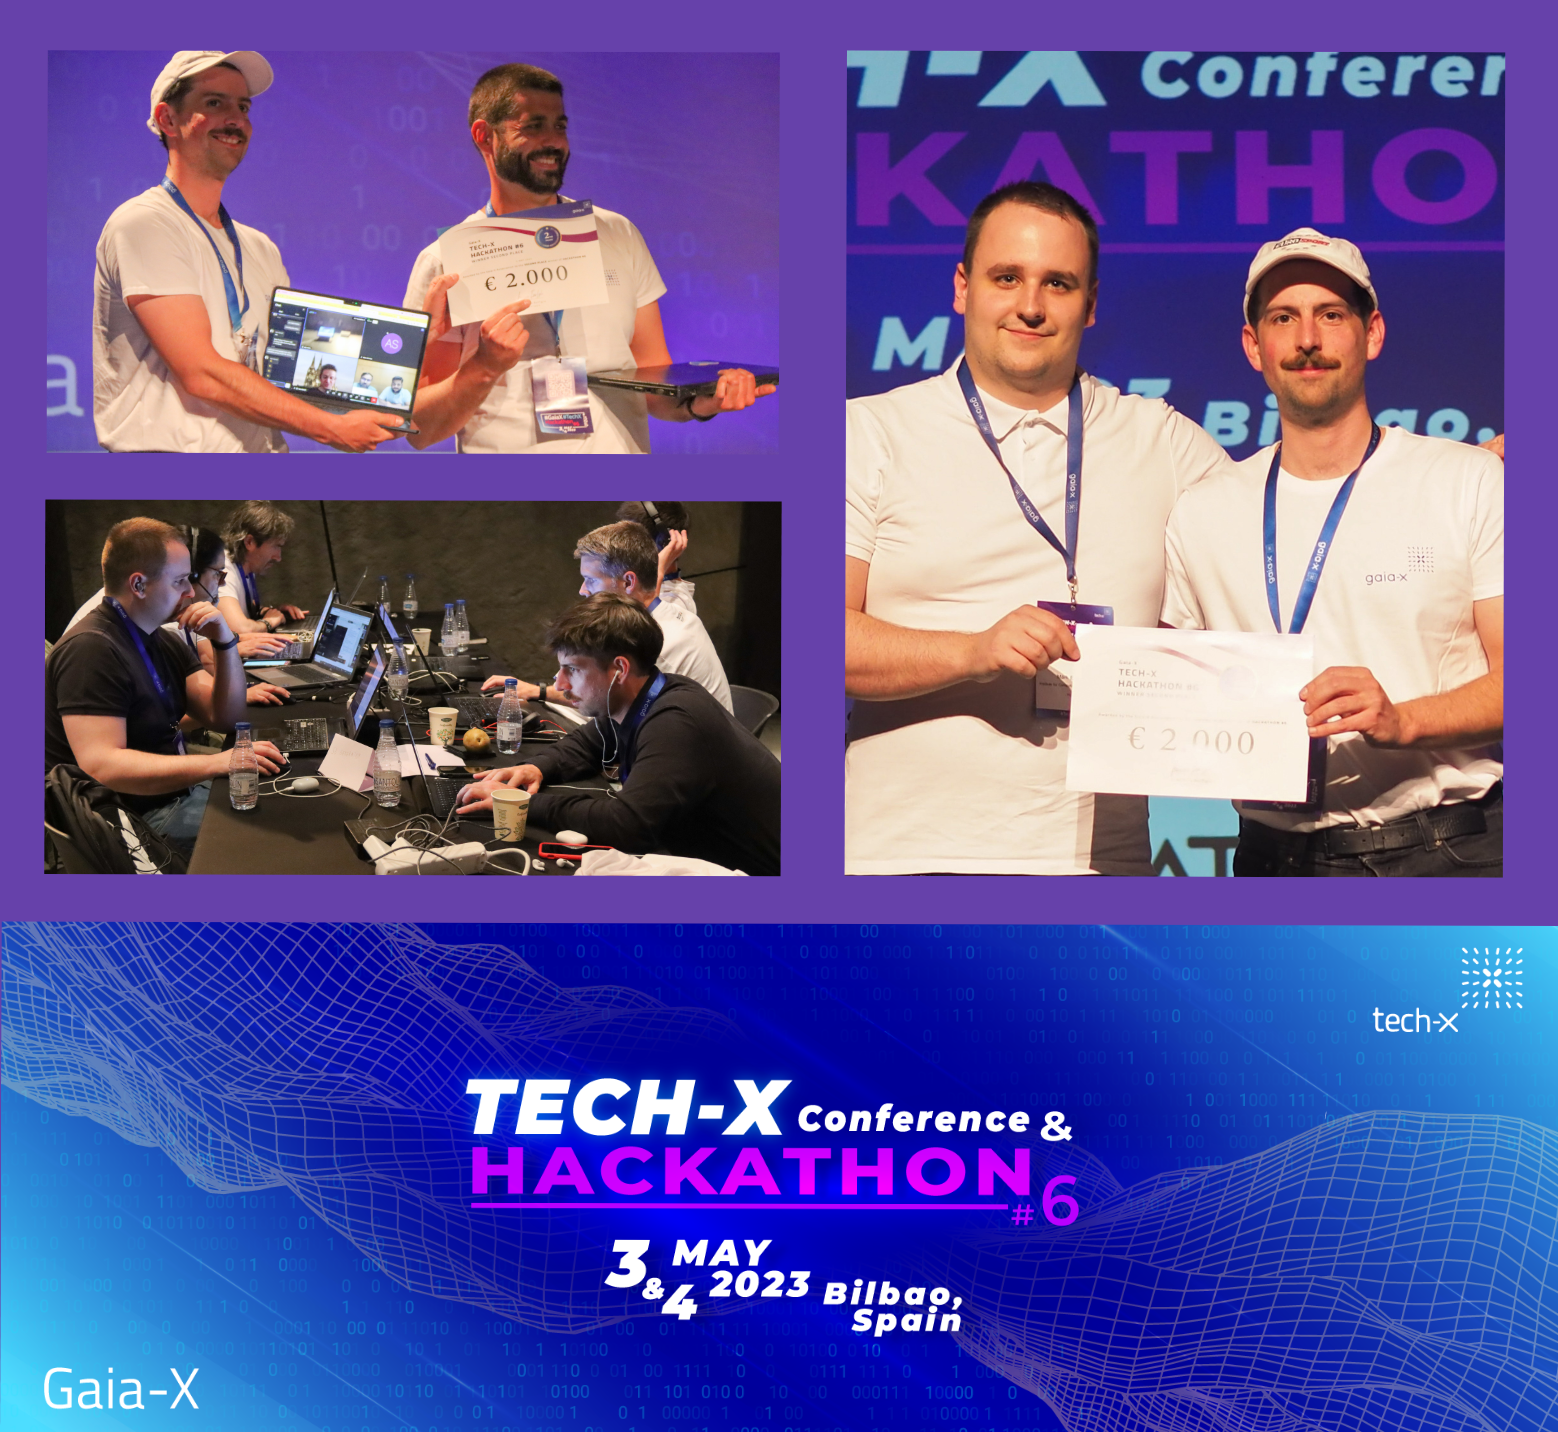 Montage of members of the Tech-X Hackathon silver medal winning team